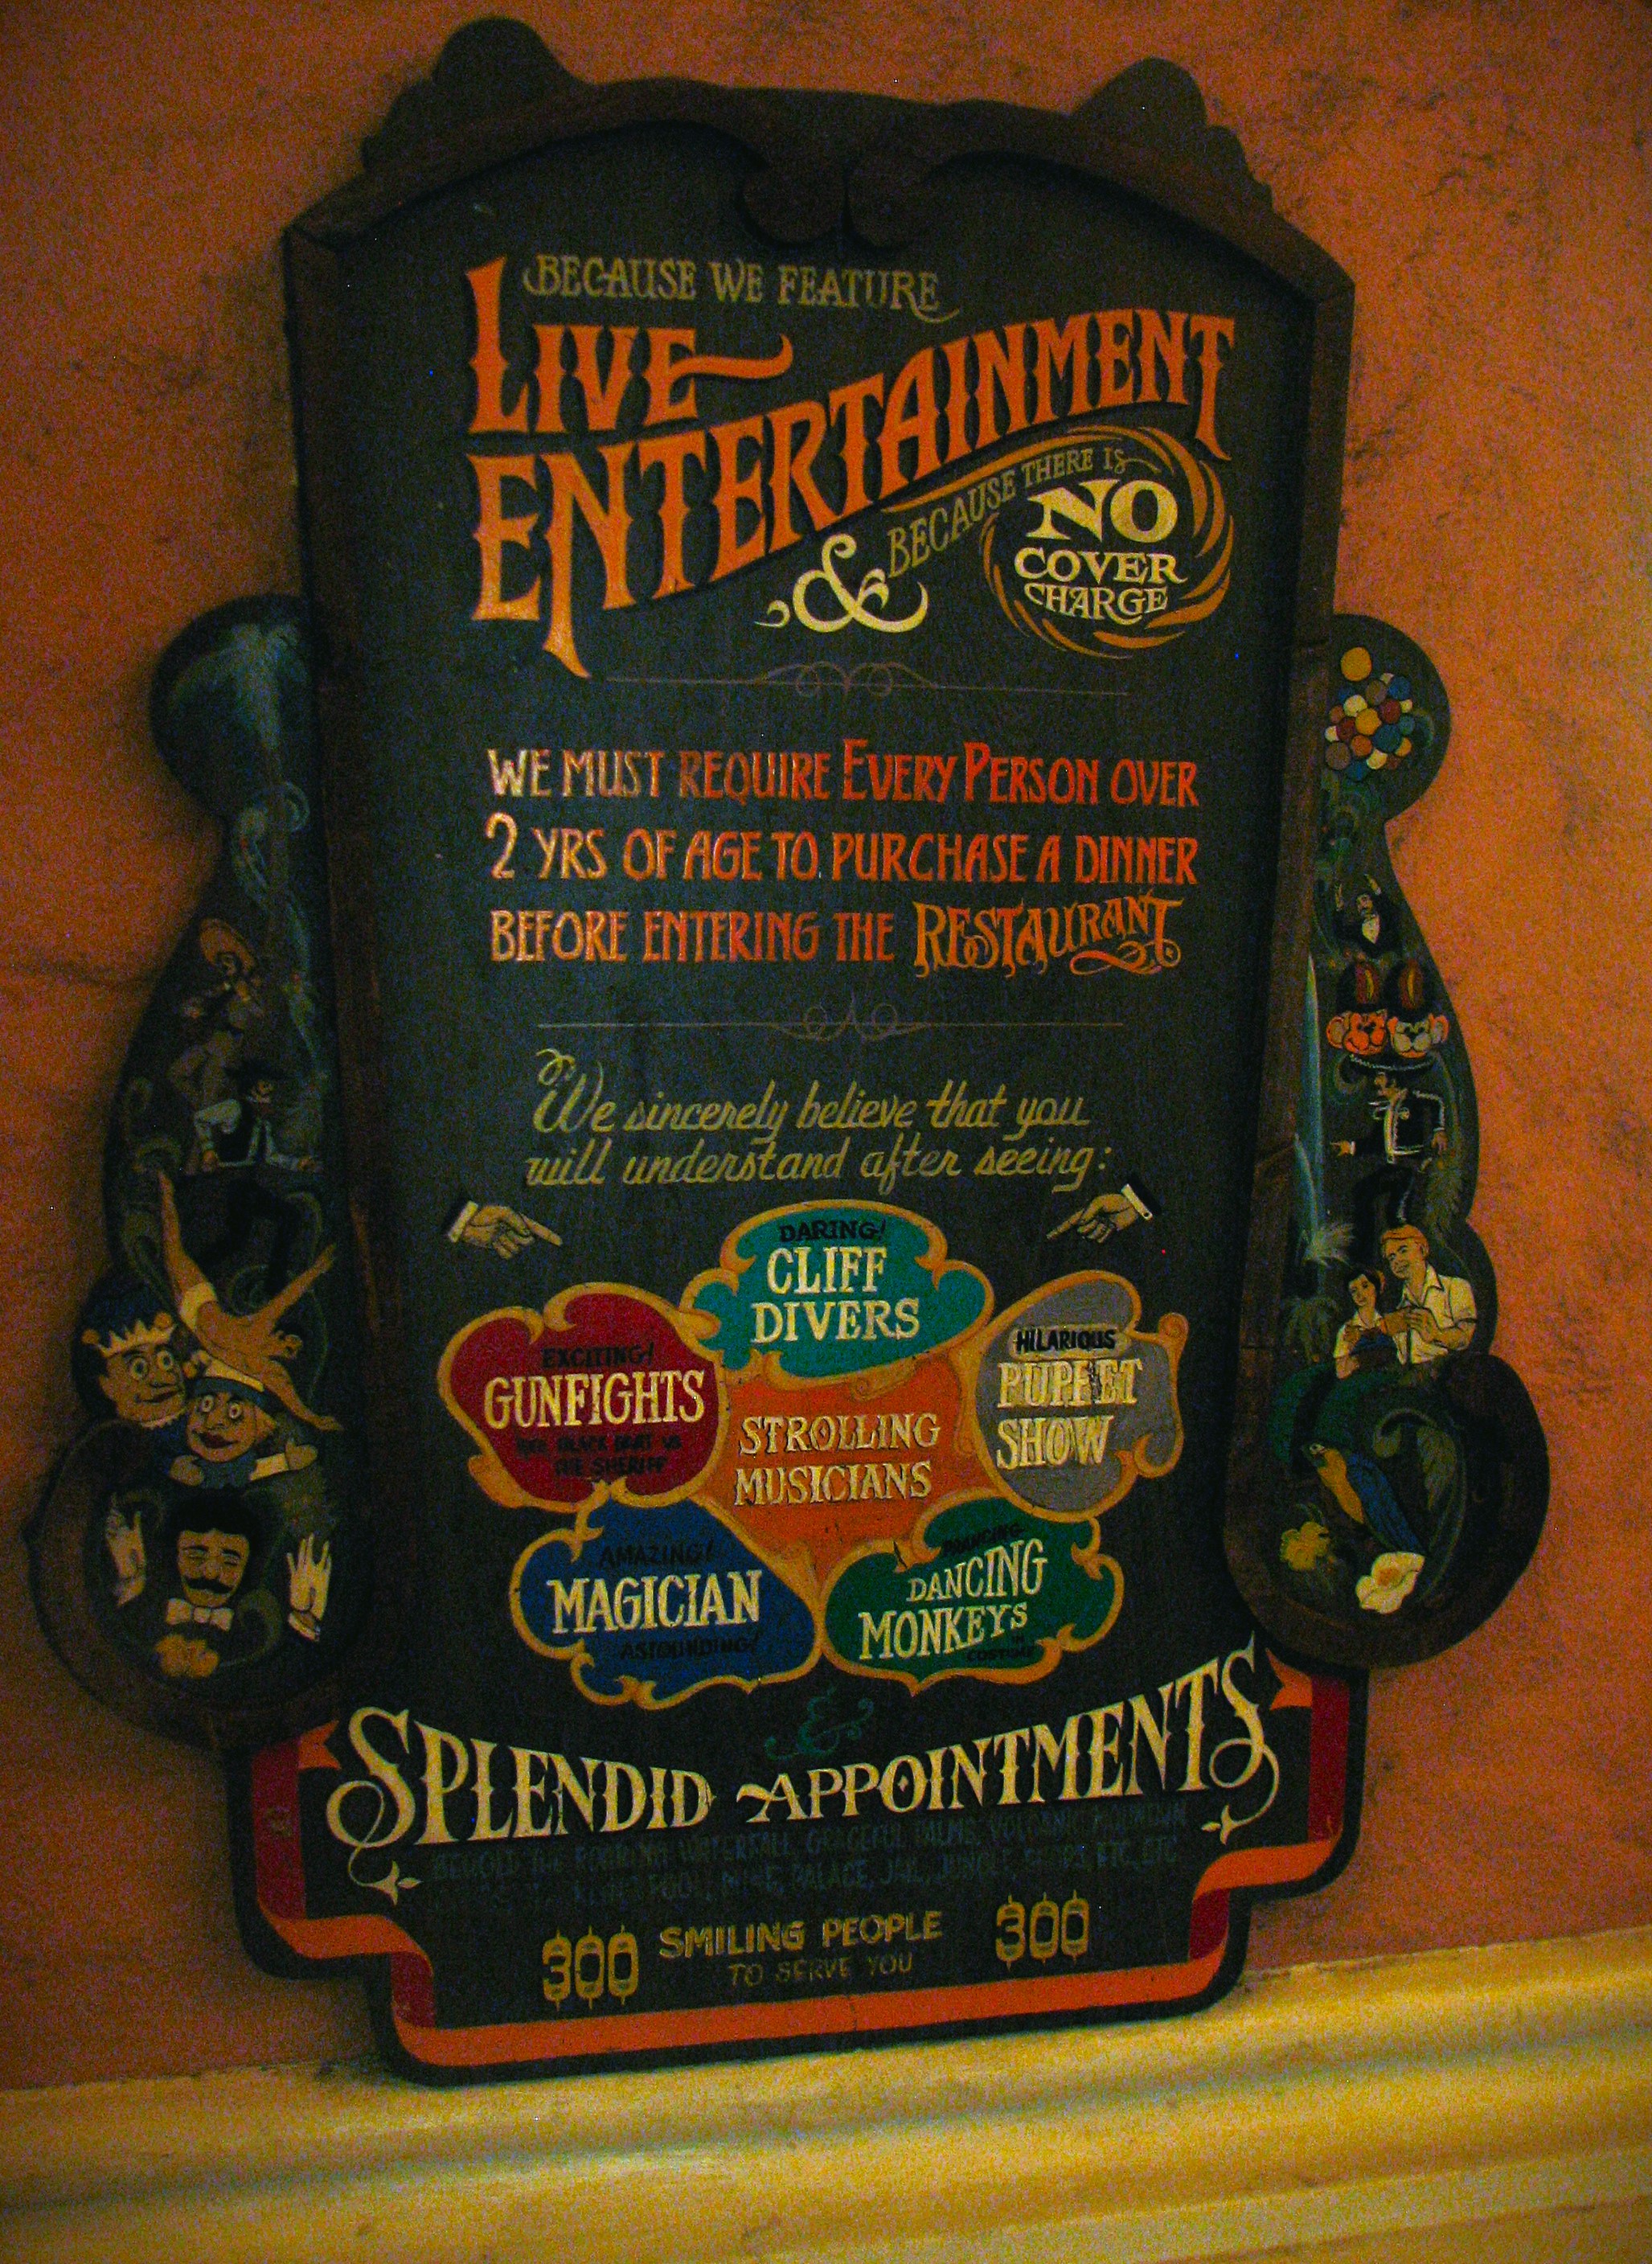 Casa Bonita Entrance Sign, reading "Because we feature live Entertainment, and because there is No Cover Charge, we must require every person over 2 years of age to purchase a dinner before entering the restaurant. We sincerely believe that you will understand after seeing: Dangerous Gunfights, daring Cliff Drivers, hilarious Puppet Shows, astounding Magicians, Dancing Monkeys, and Splendid Appointments."